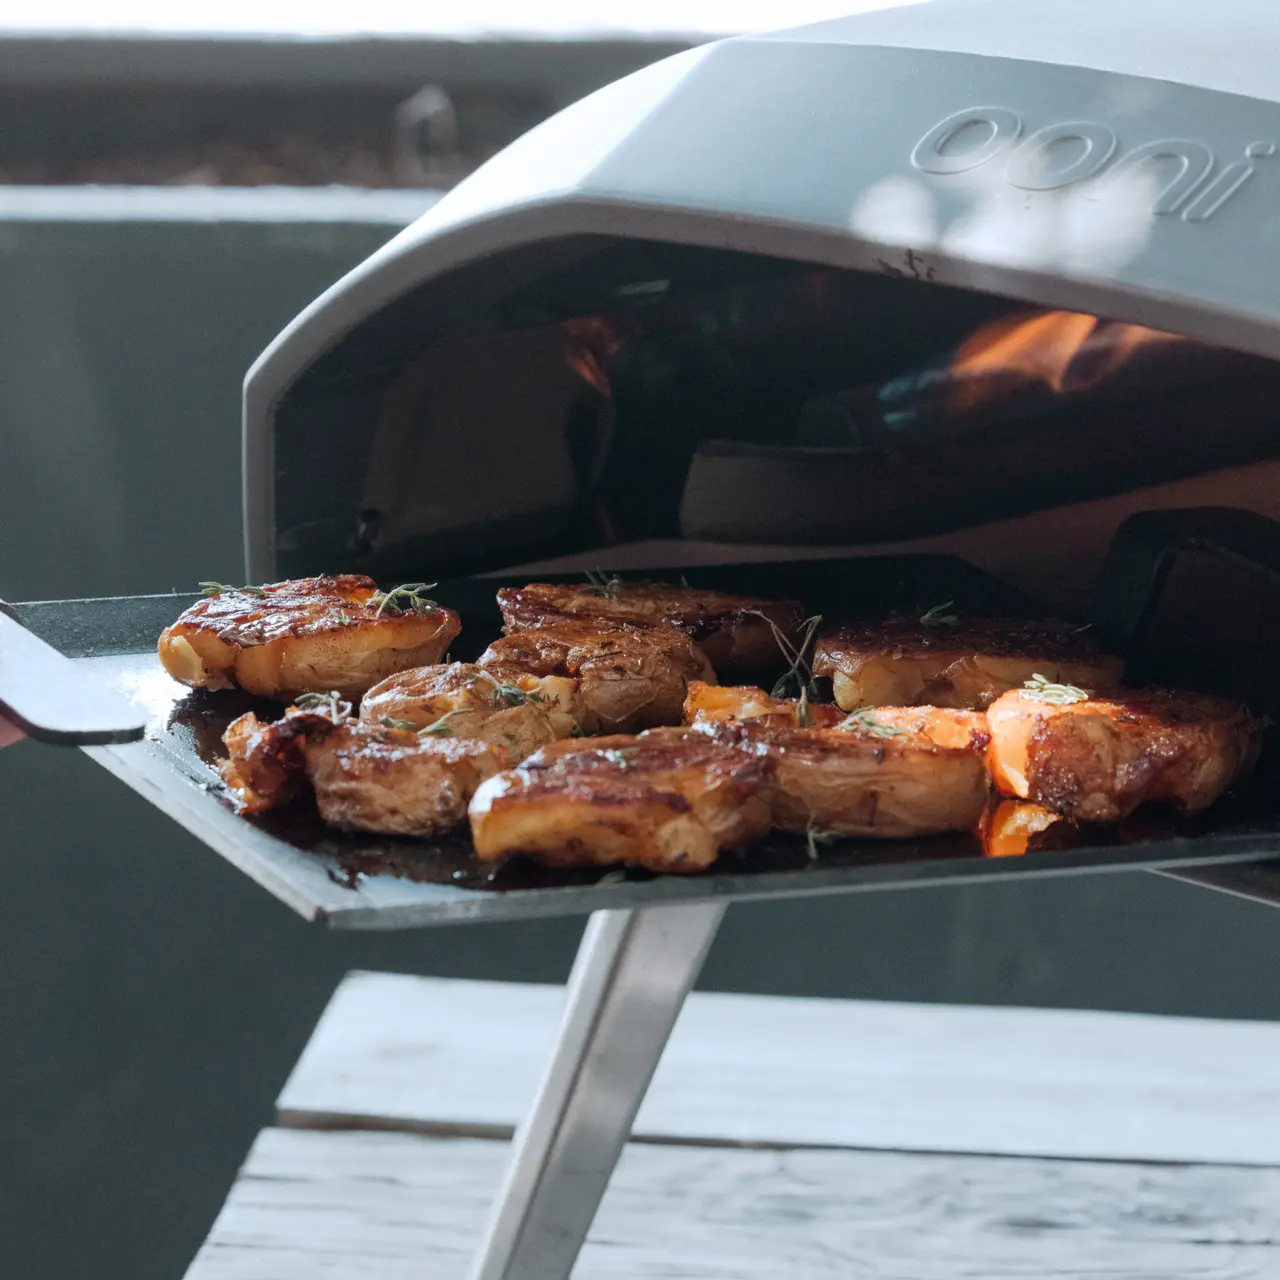 Juicy steaks are grilling over an open flame inside a barbecue grill.